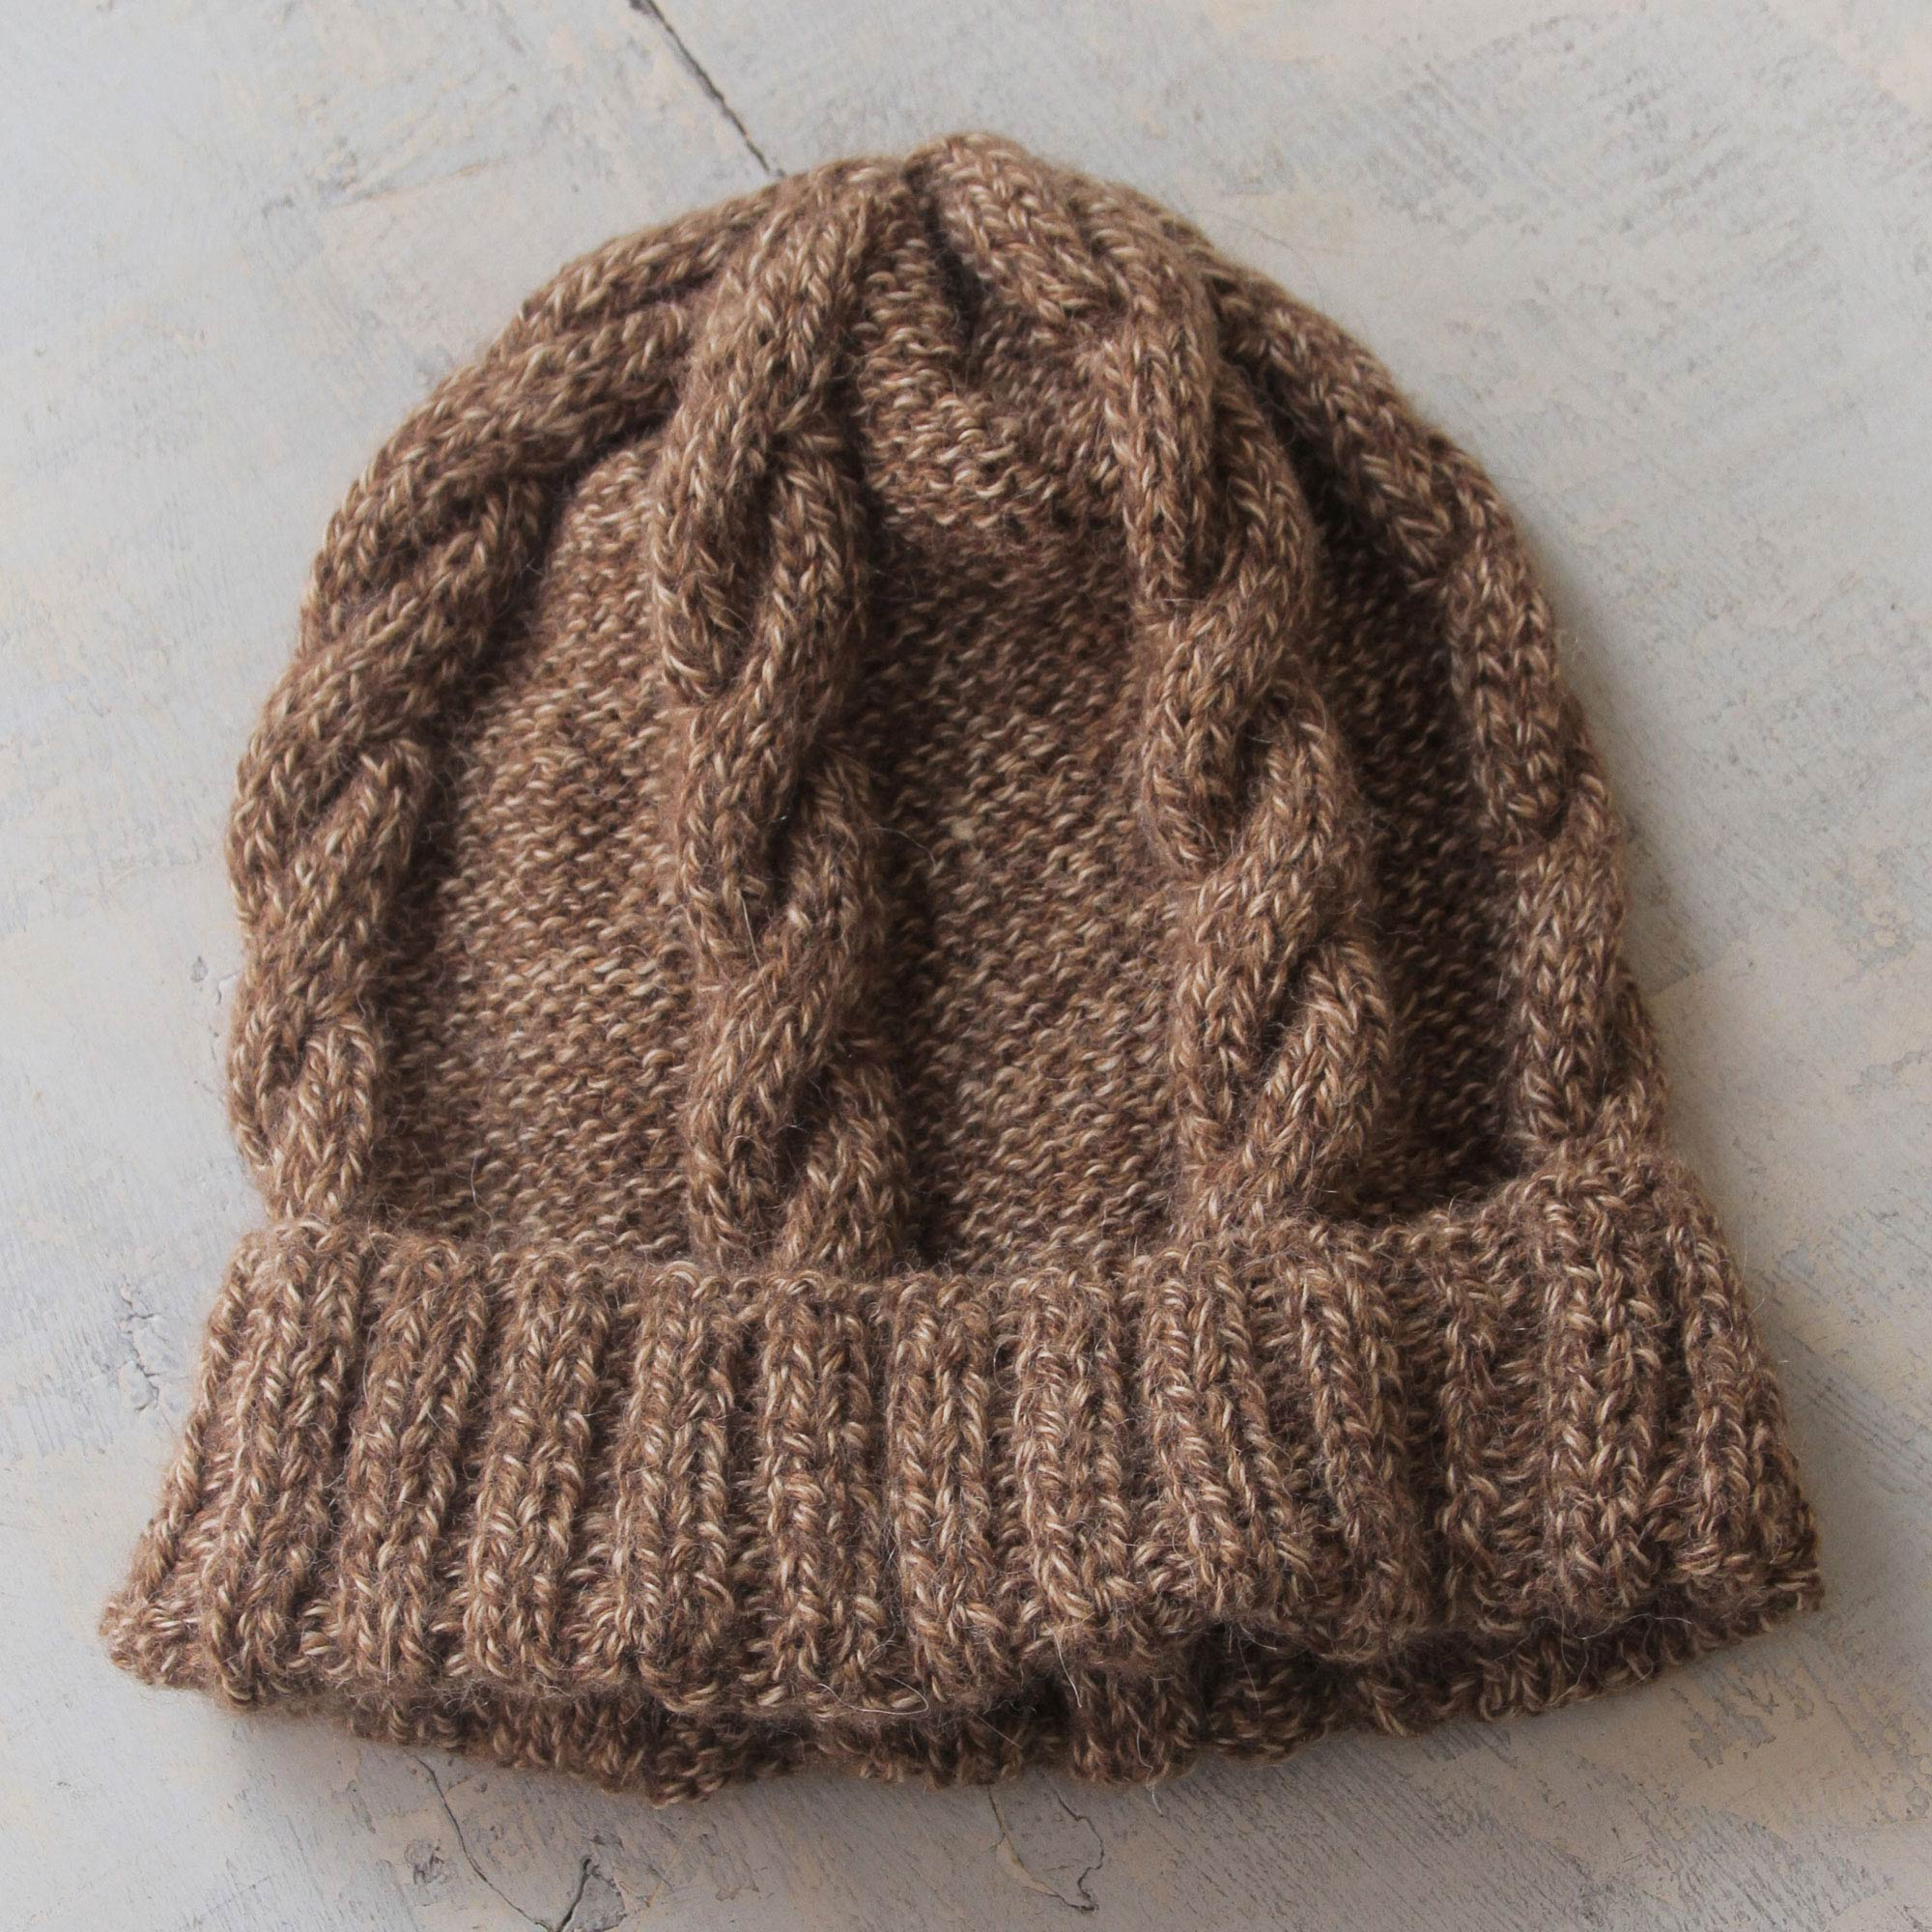 GreaterGood Shop | Men's Hat in Brown Alpaca Blend with Thick Braided ...